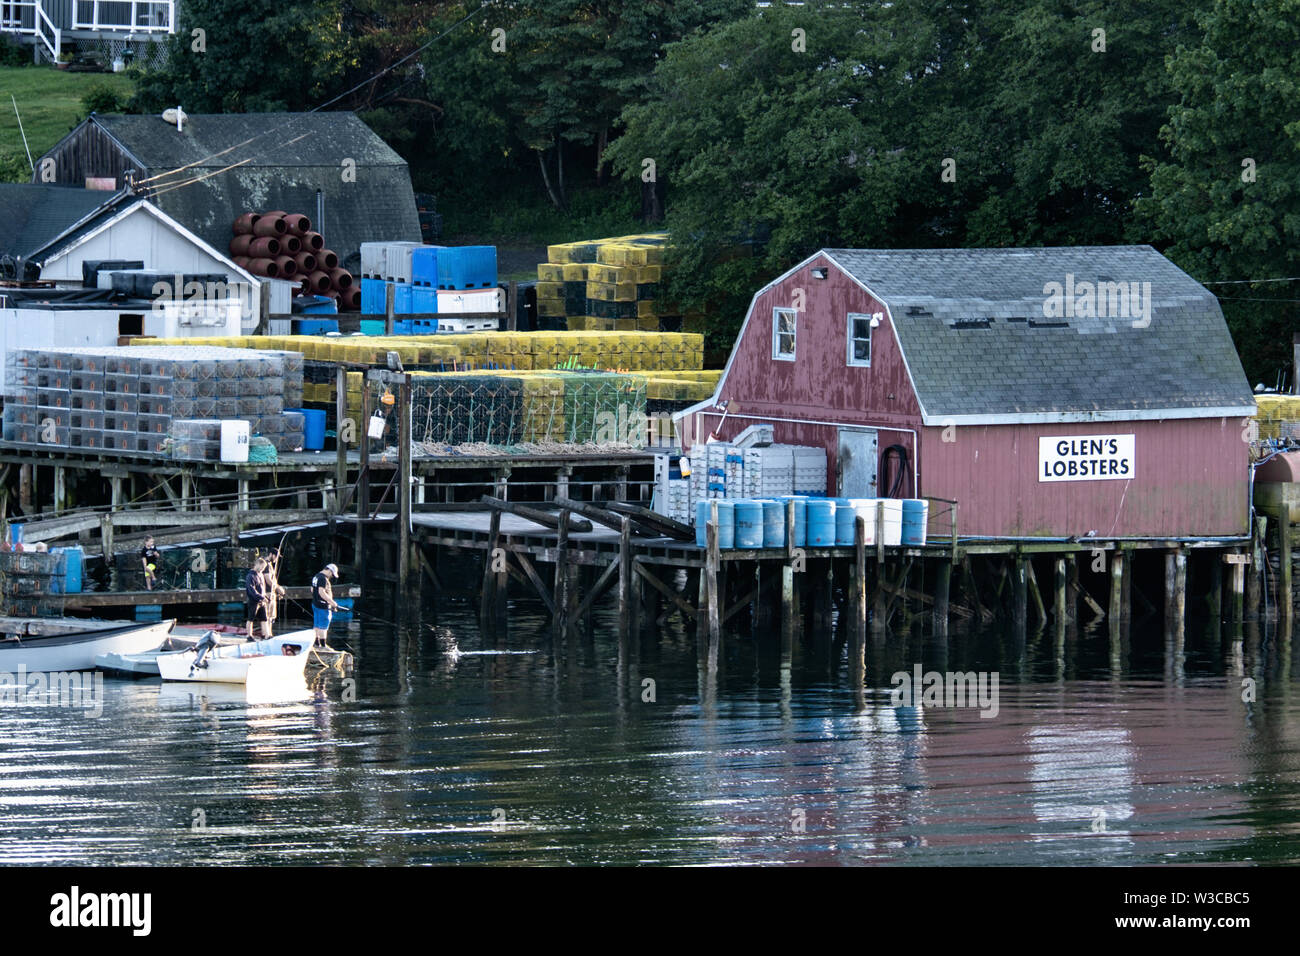 Fisherman try their luck at Glens Lobster Wharf on Mackerel Cove, Bailey Island on a summers day in Harpswell, Maine. Stock Photo